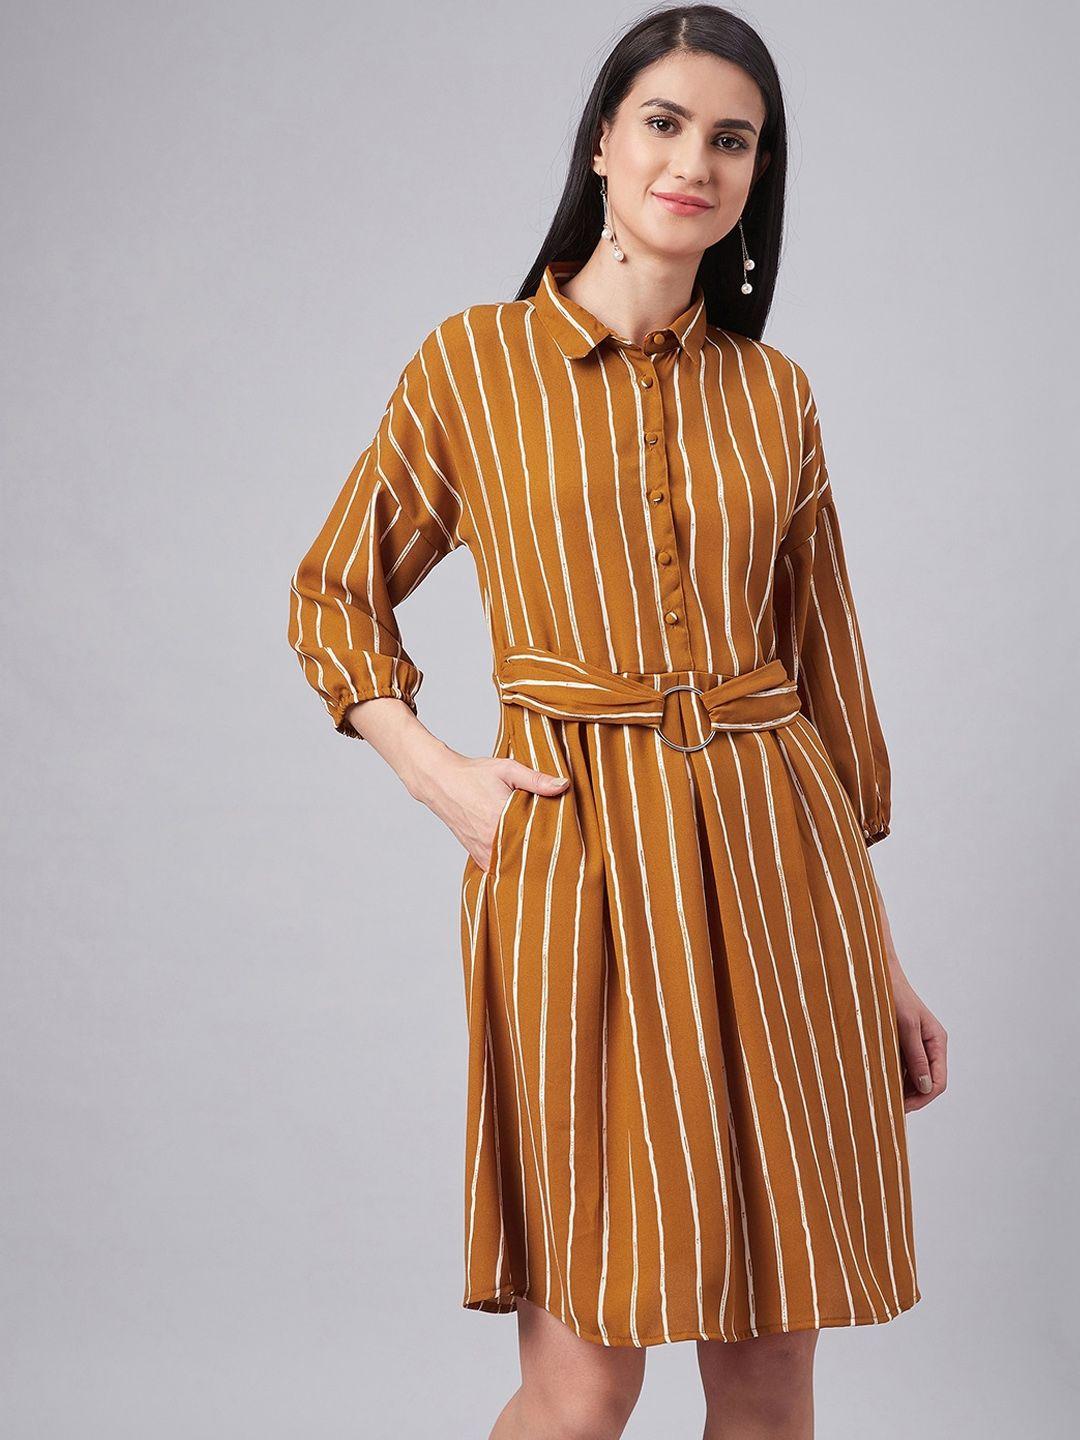 marie claire women mustard yellow striped a-line dress